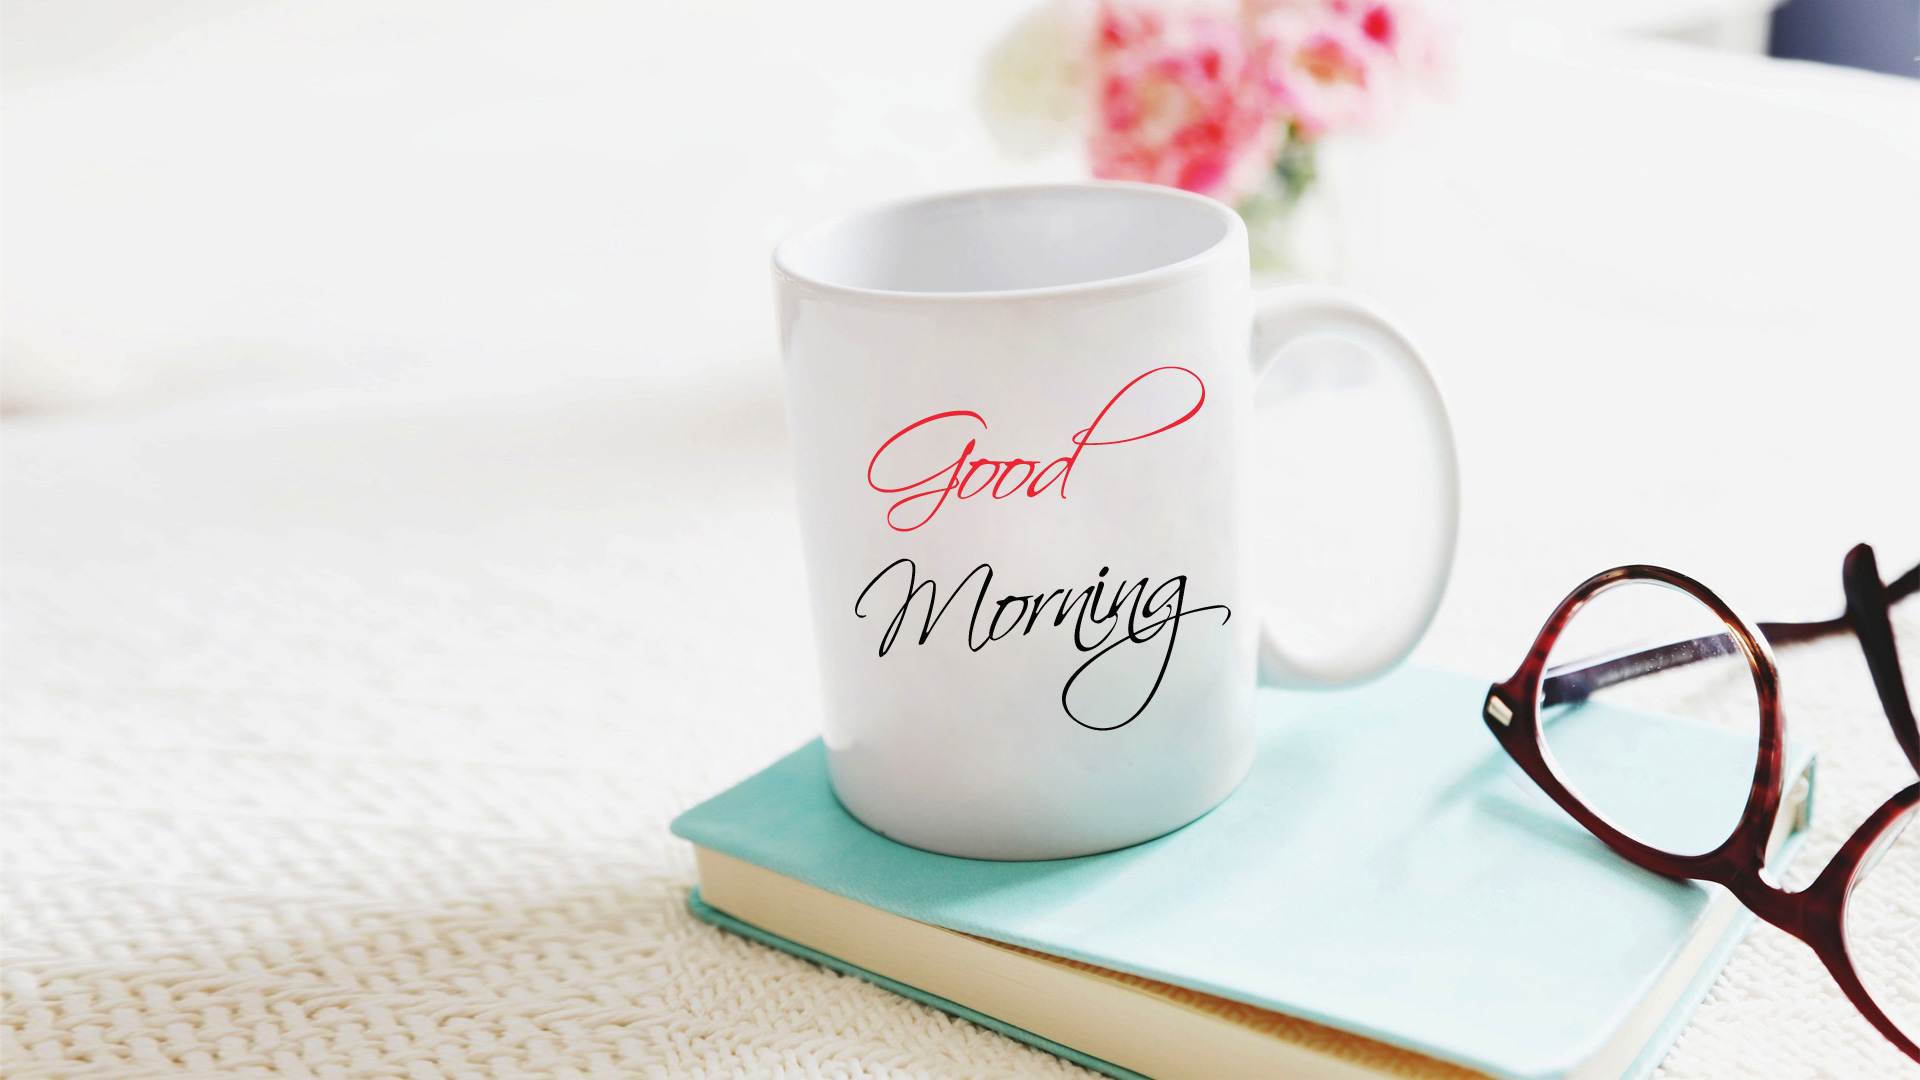 Good Morning Coffee Cup Wallpaper